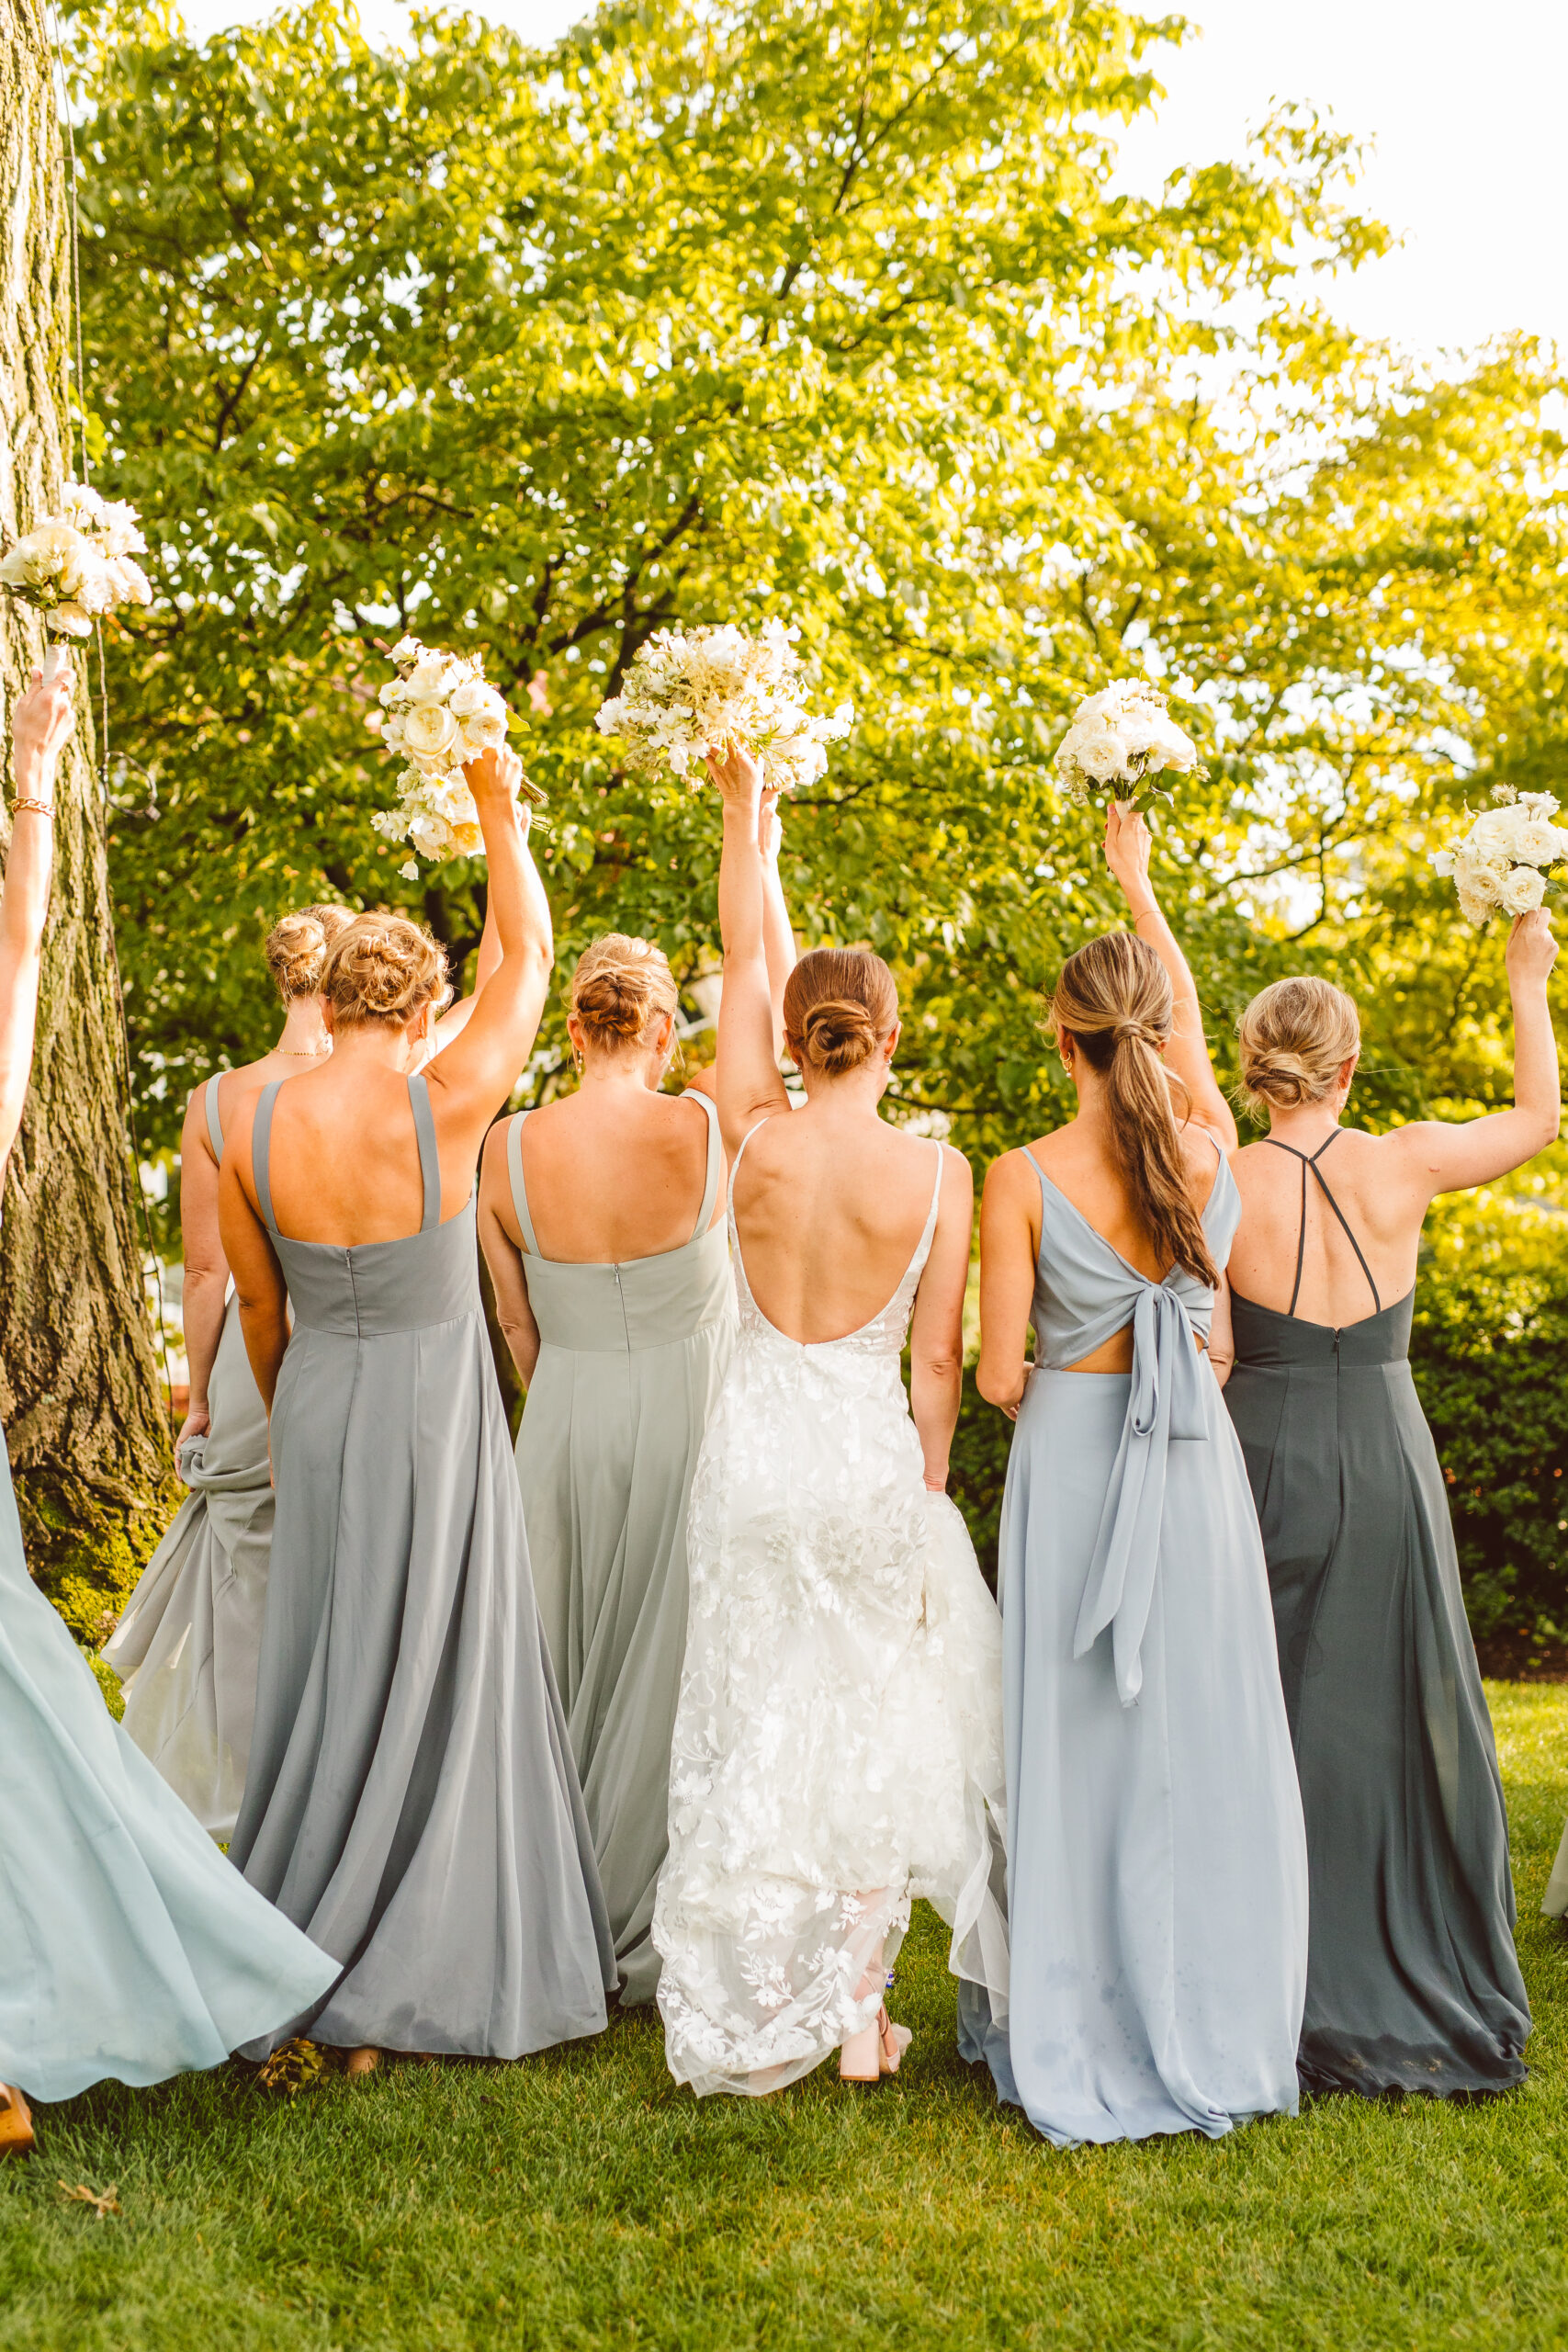 Bride and bridesmaids photos from country club wedding captured by Charlotte wedding photography Brooke Michelle Photo